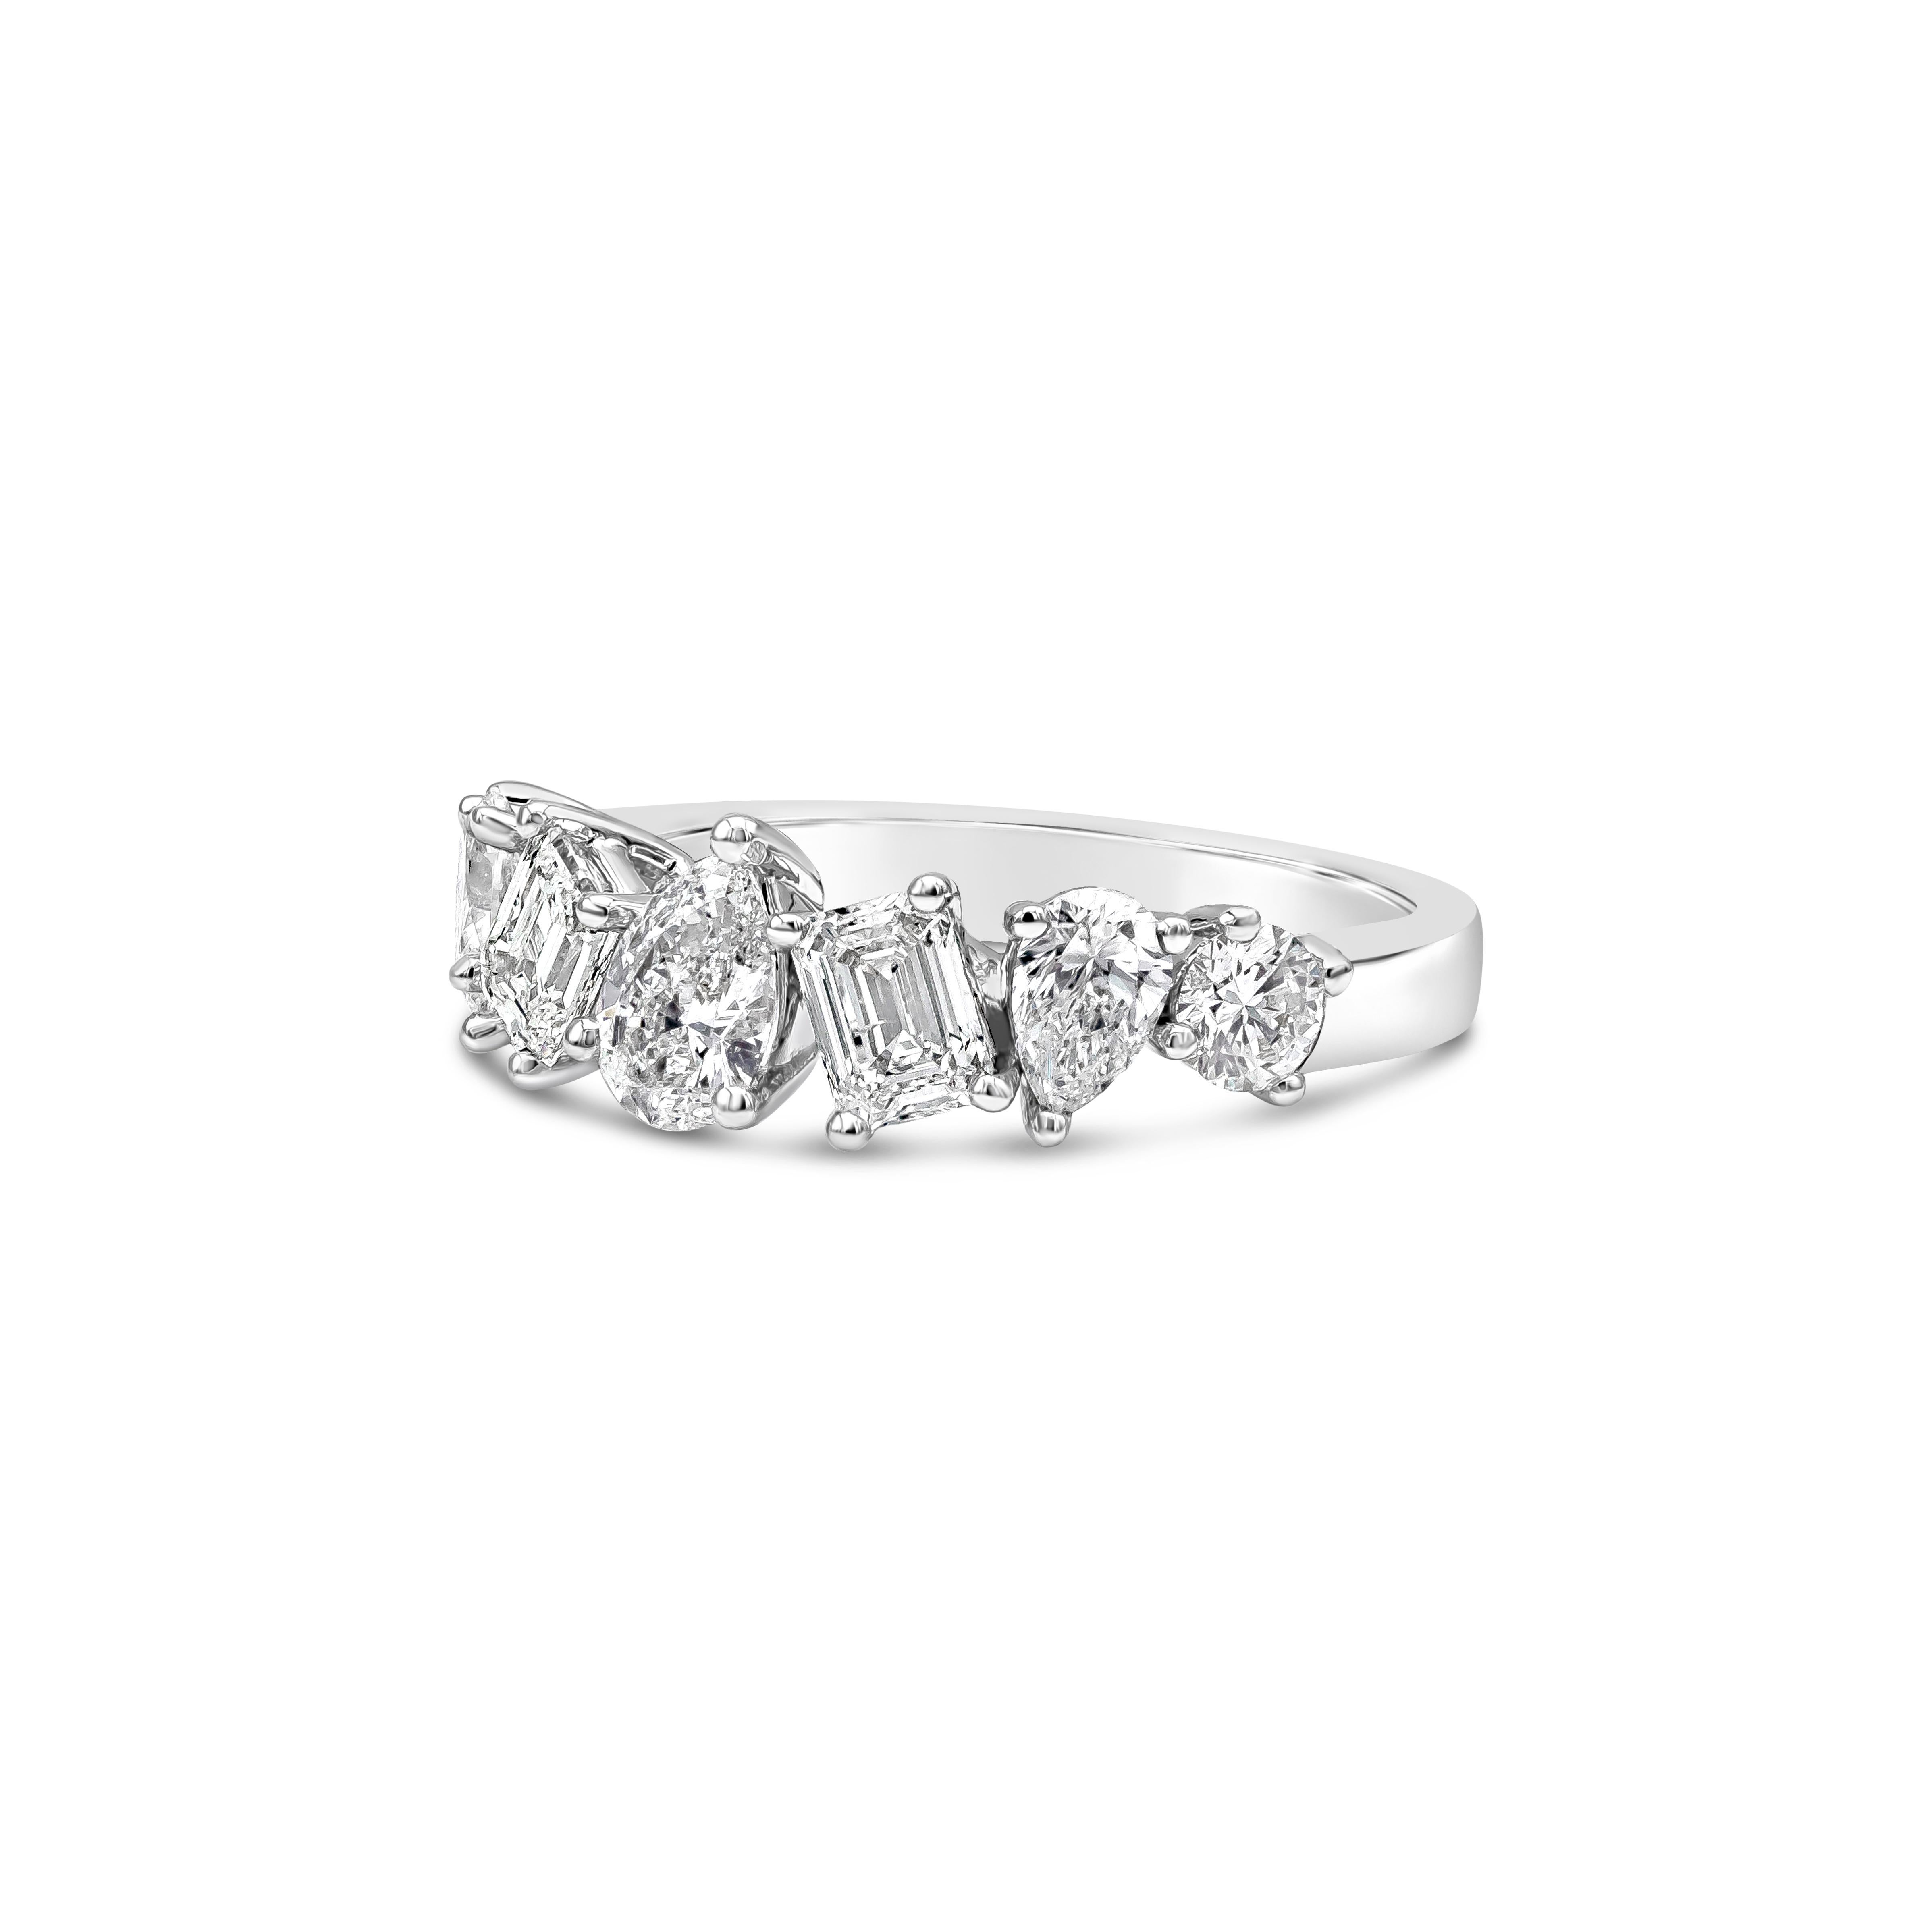 A sophisticated but modern piece of jewelry showcasing an alternating seven mixed cut diamonds that includes brilliant round, emerald cut and pear shape, elegantly set half way that is made in 18 karat white gold. The weight of the diamonds is 2.00